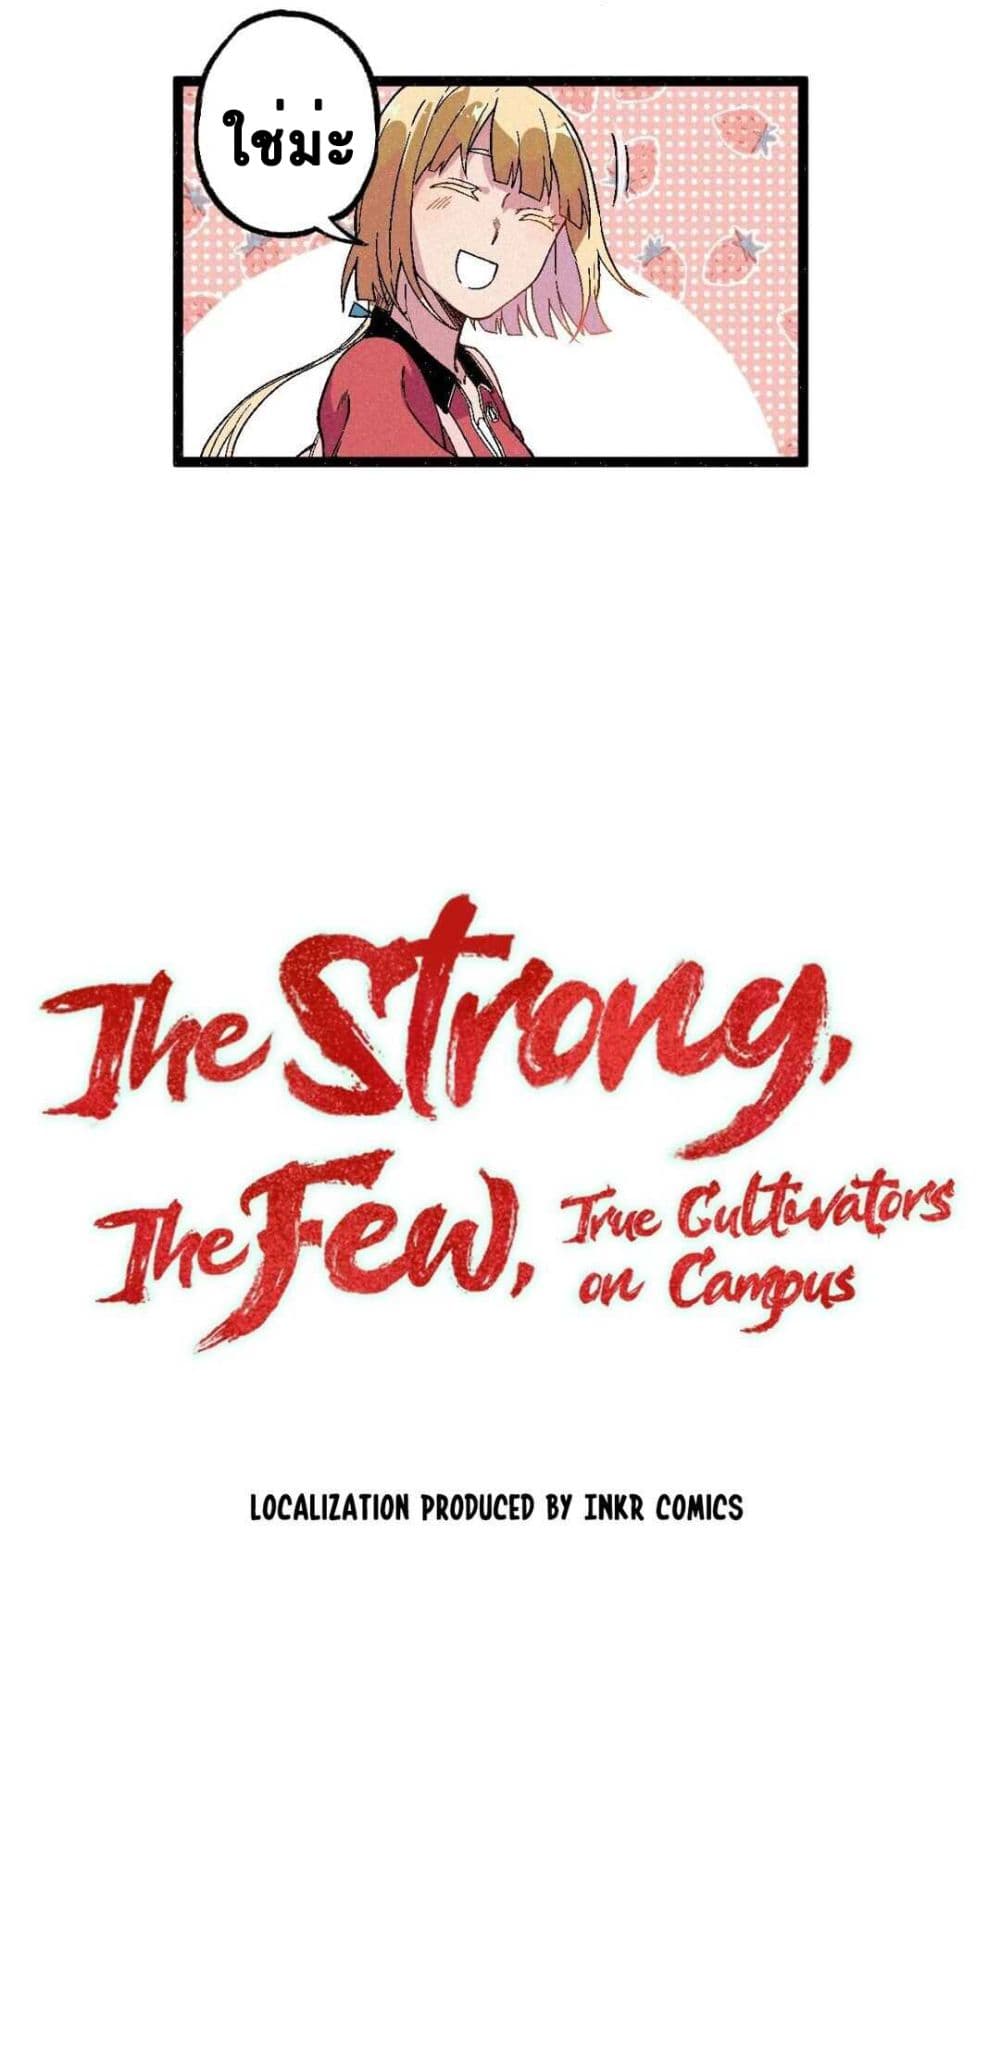 The Strong, The Few, True Cultivators on Campus 7-7